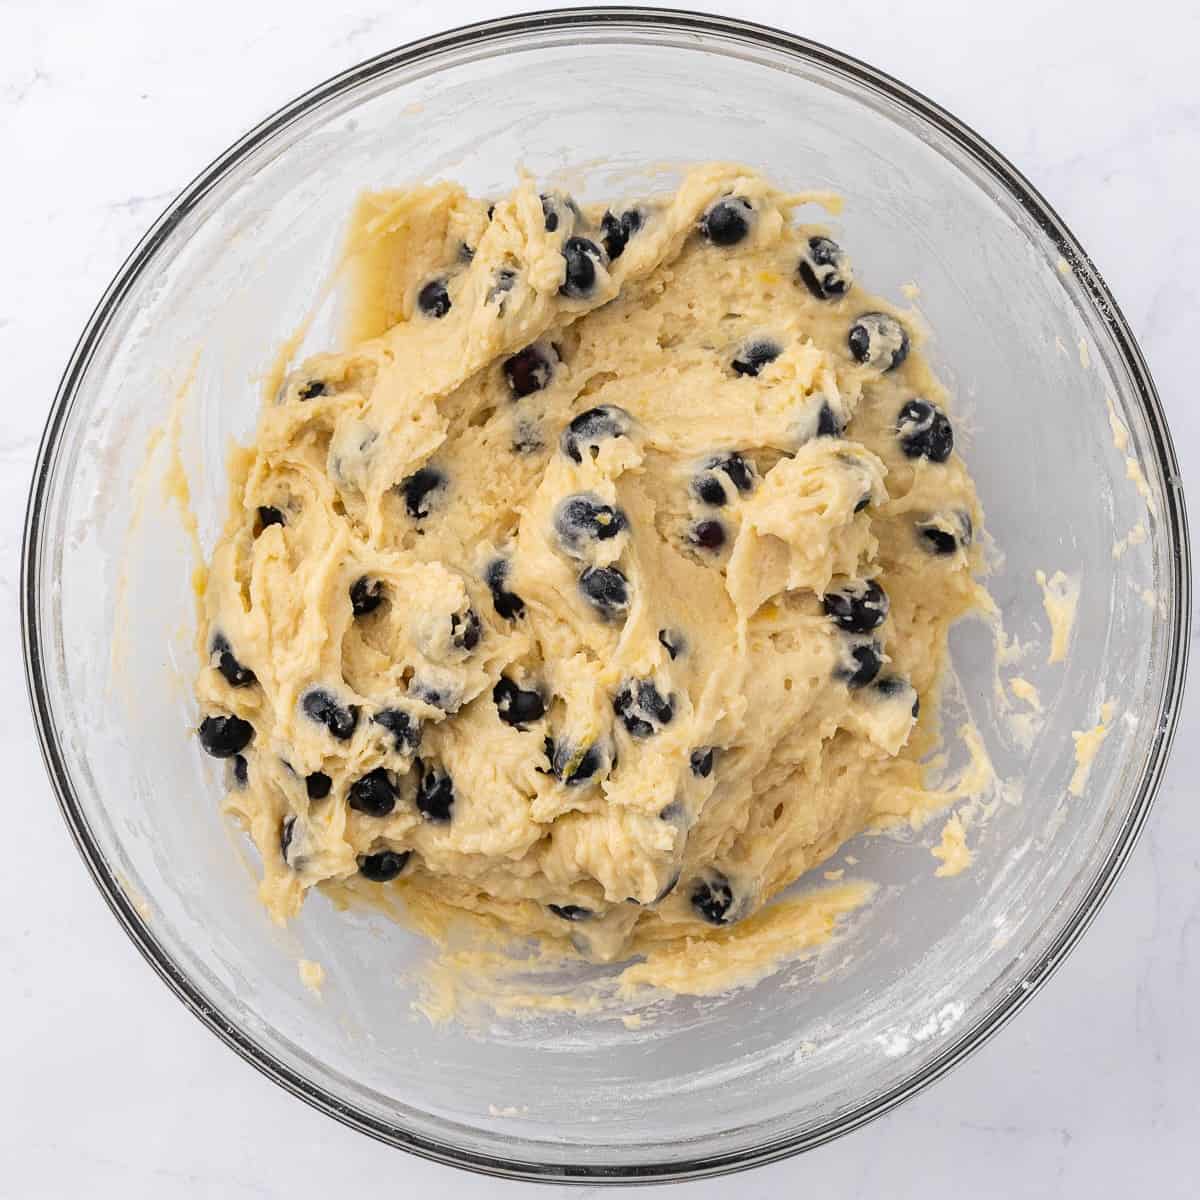 Lemon blueberry muffin batter in a large glass mixing bowl.